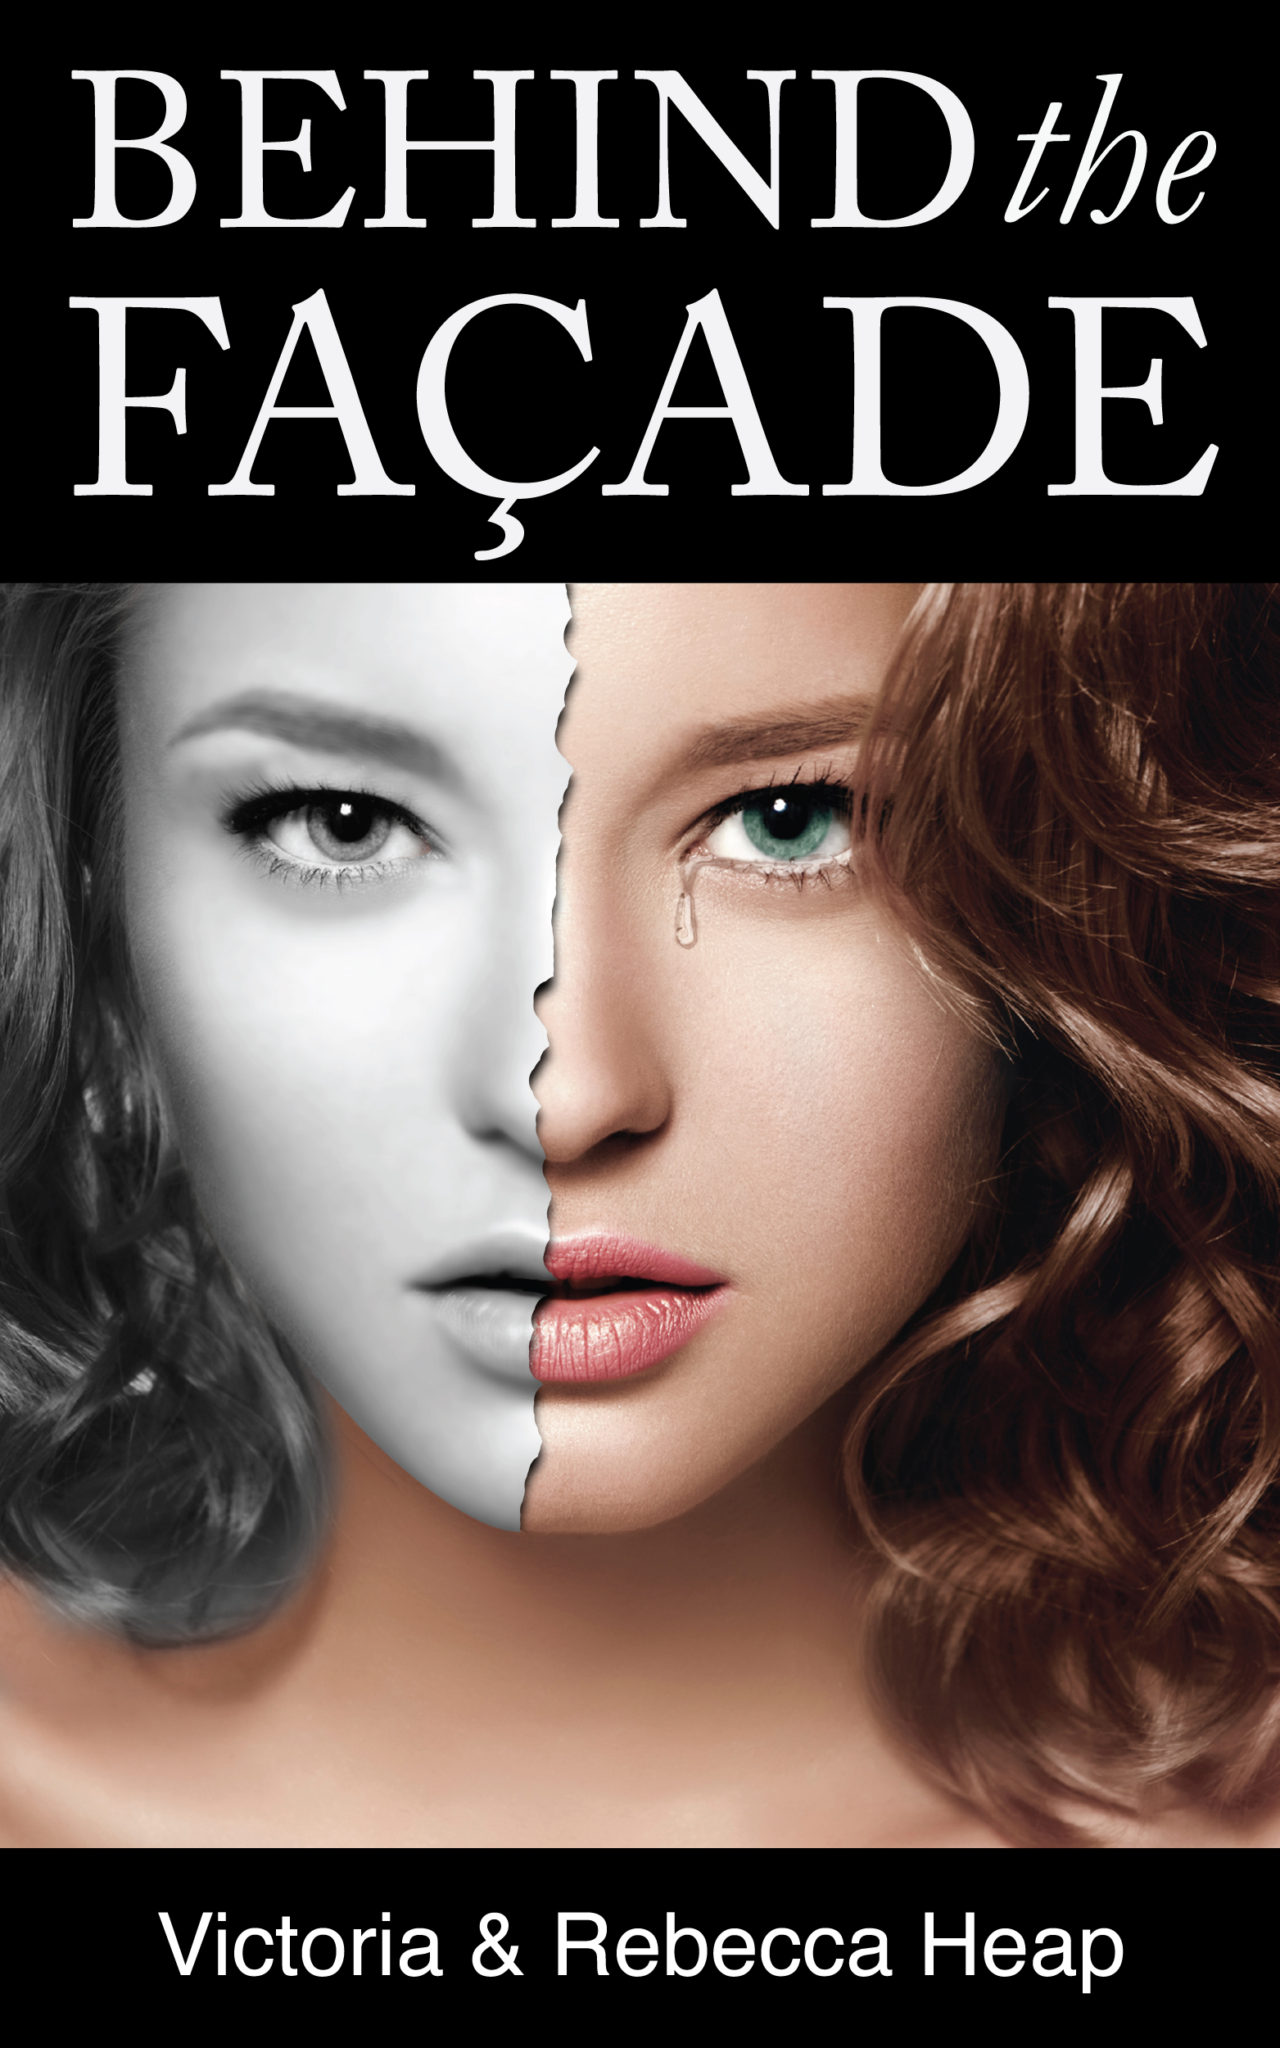 BEHIND THE FACADE by REBECCA AND VICTORIA HEAP